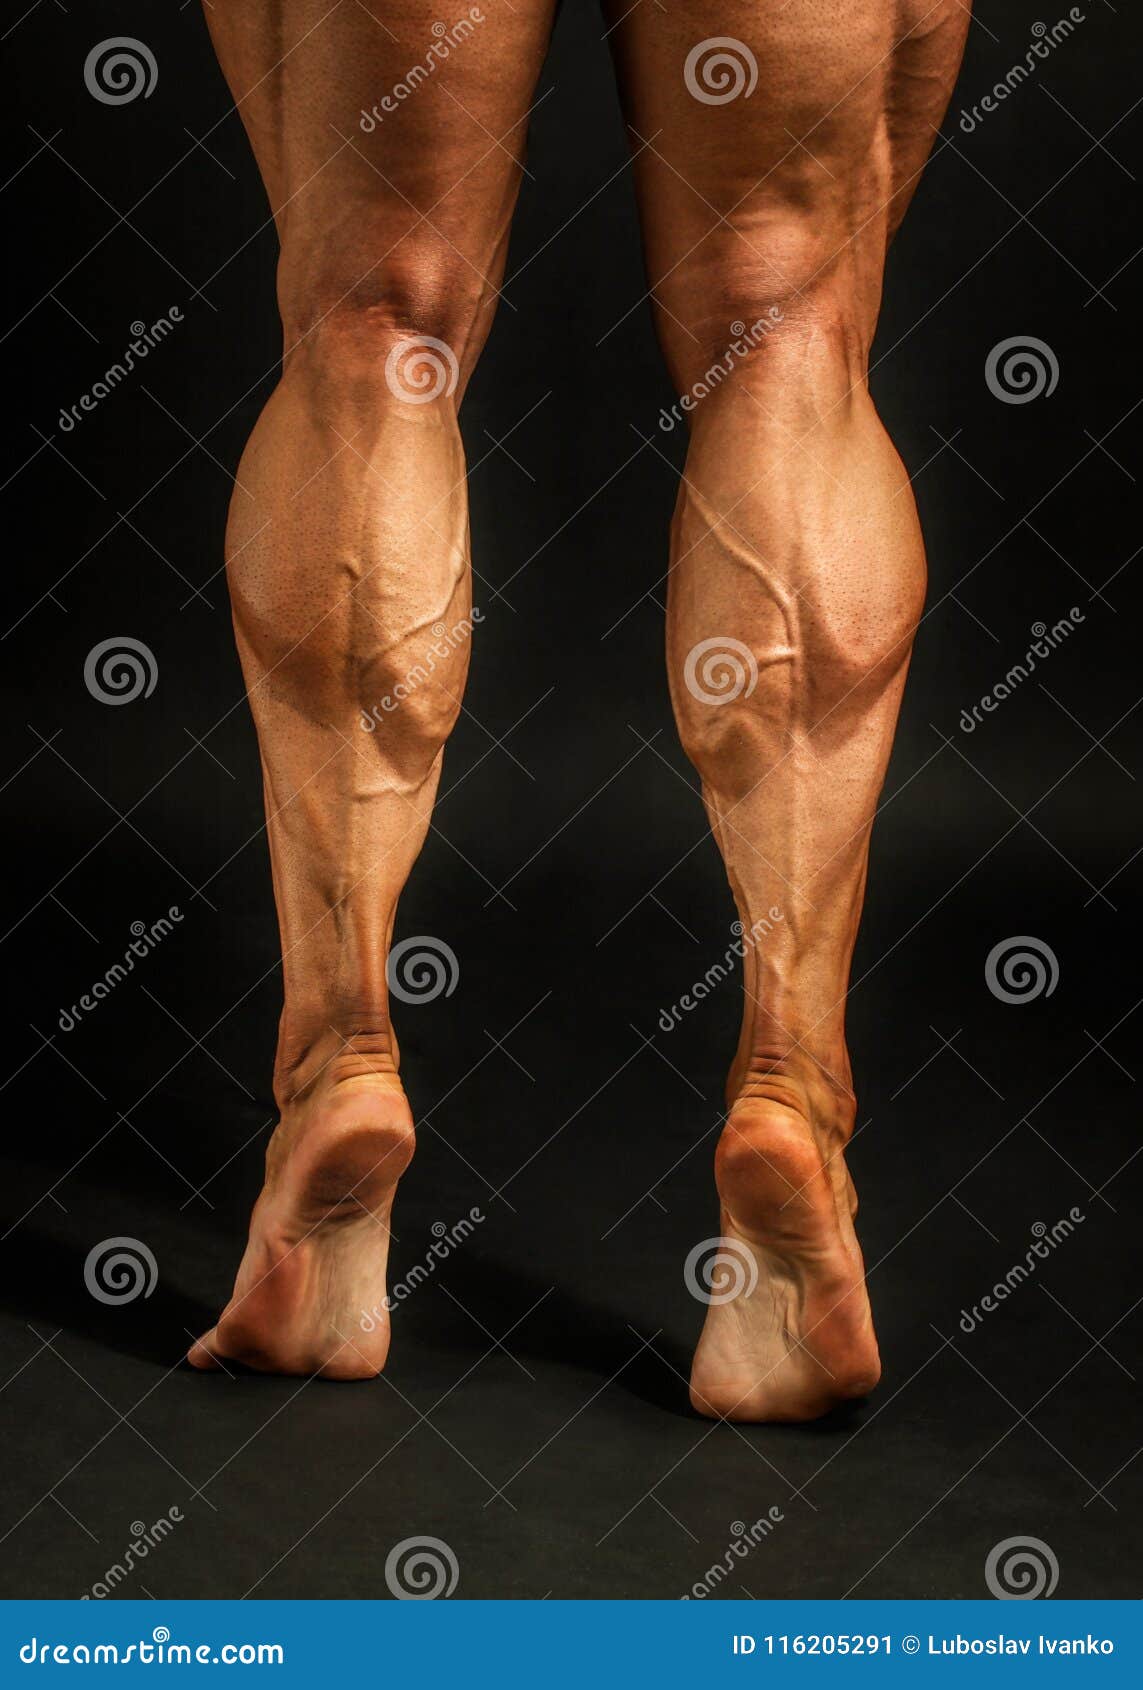 Thick male legs stock photo. Image of muscular, thighs - 1390850